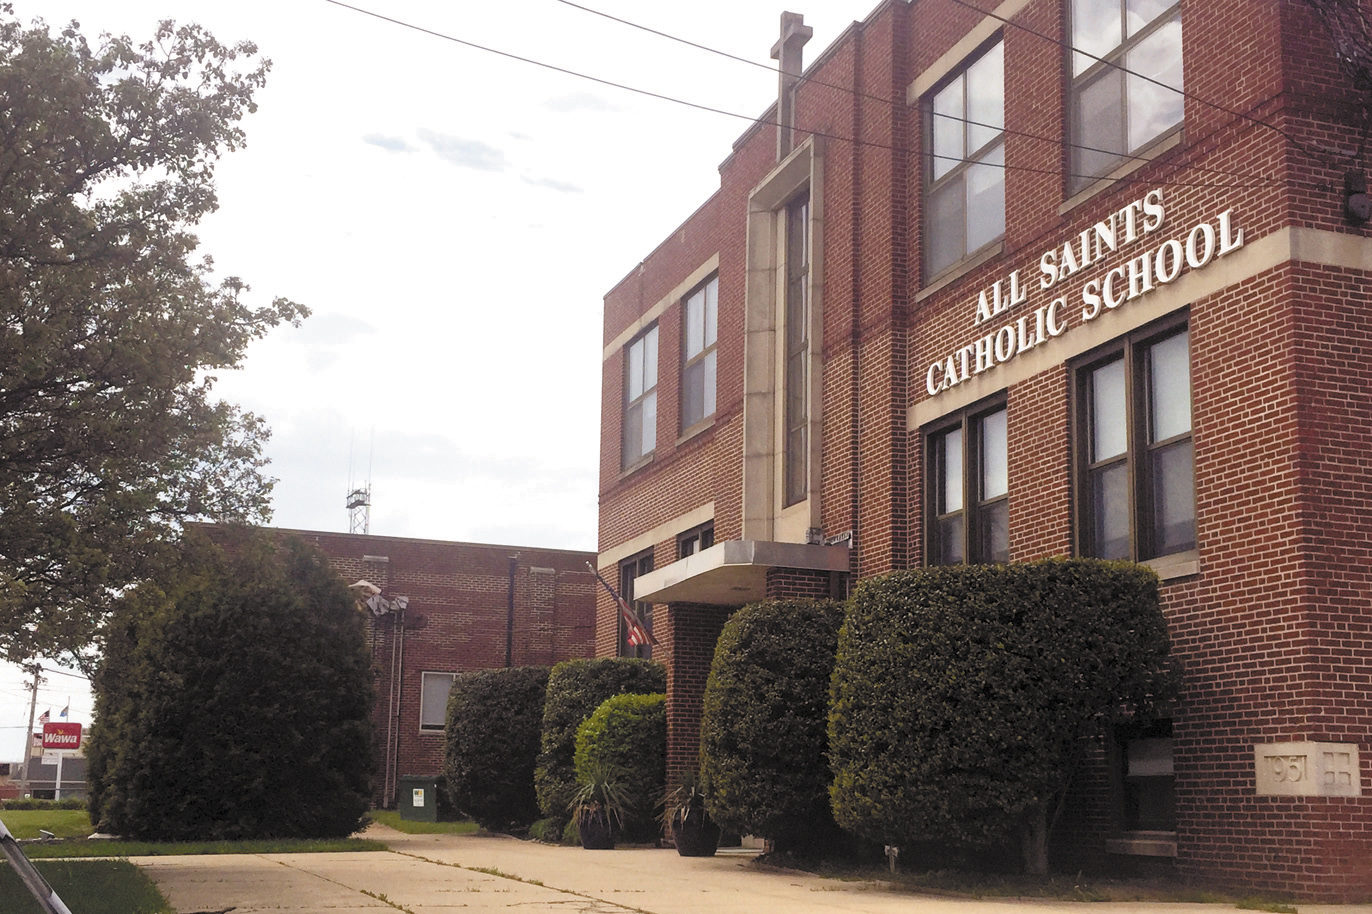 all-saints-catholic-school-in-elsmere-to-close-at-the-end-of-2020